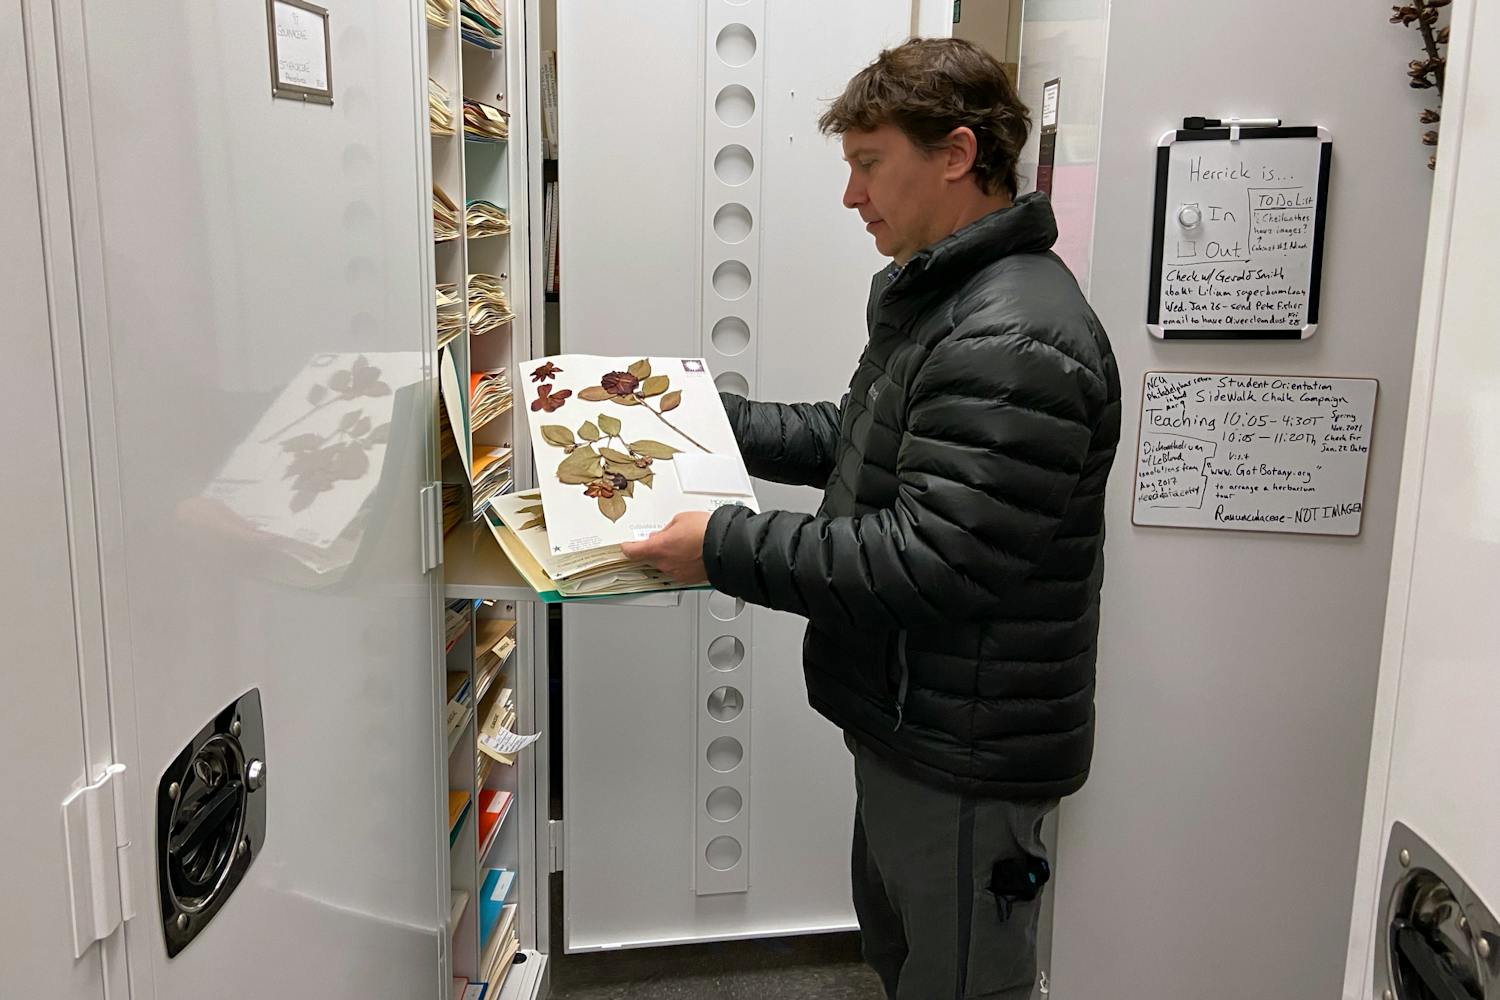 Herrick Brown, curator of the University of South Carolina’s A.C. Moore Herbarium, holds one of 140,000 dried plant specimens. Brown graduated from 鶹С򽴫ý in 1996 with a degree in biology and has used this passion to pursue work in a variety of fields, including creating habitats for the animals at the Riverbanks Zoo in Columbia, SC.